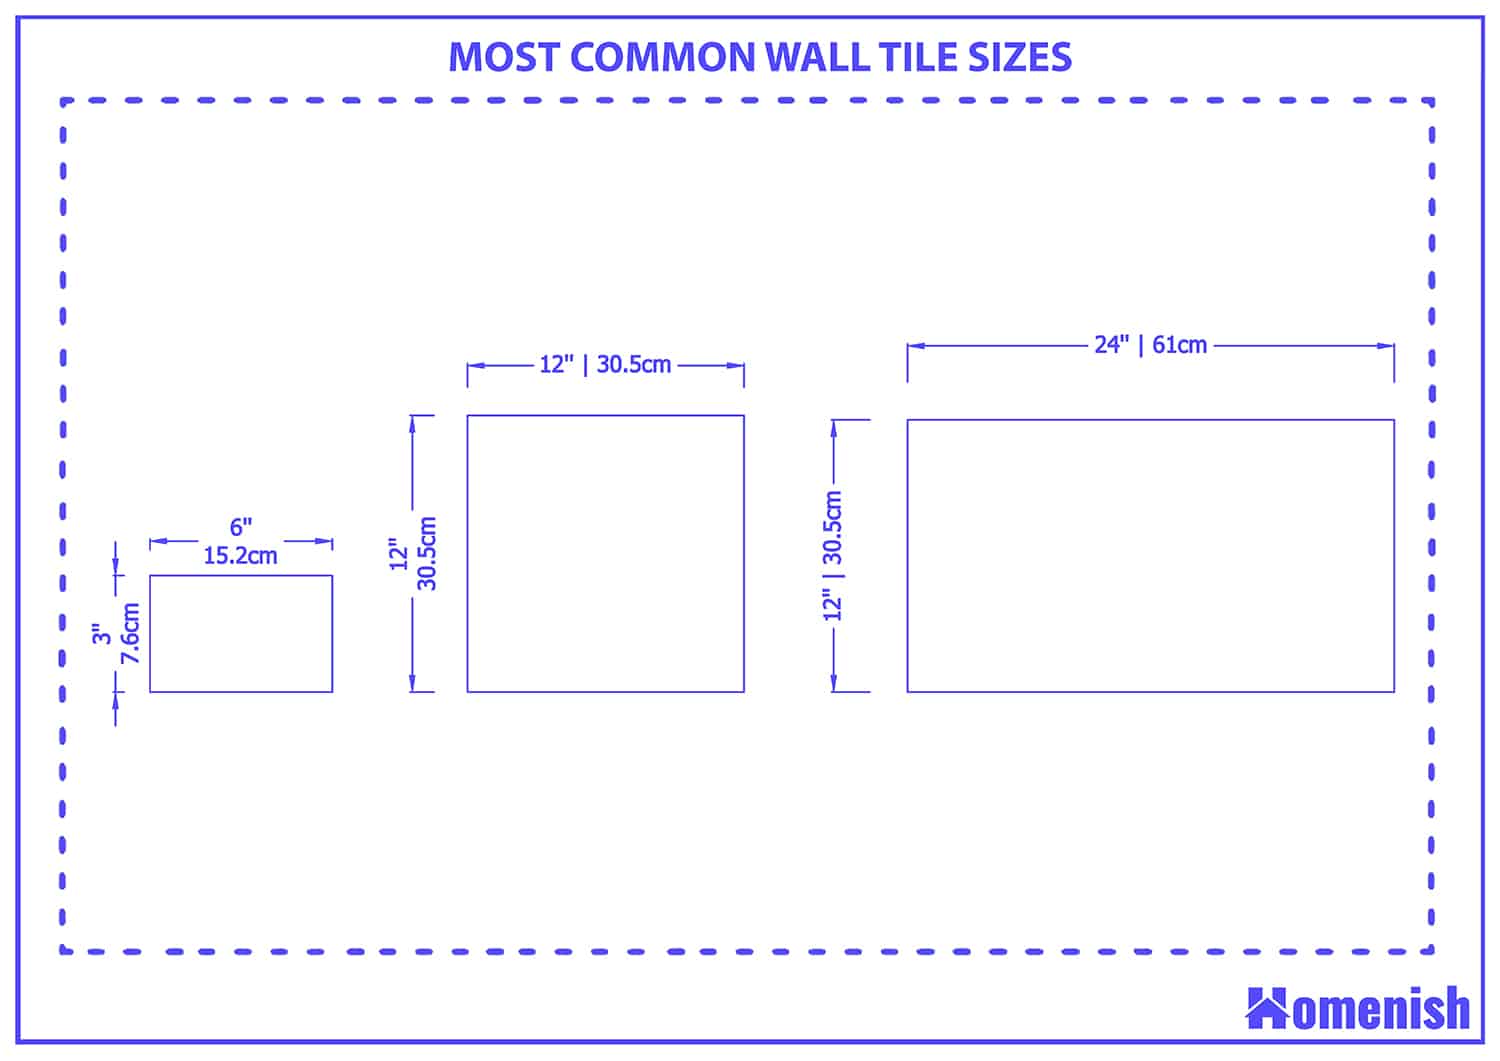 Most common wall tile sizes